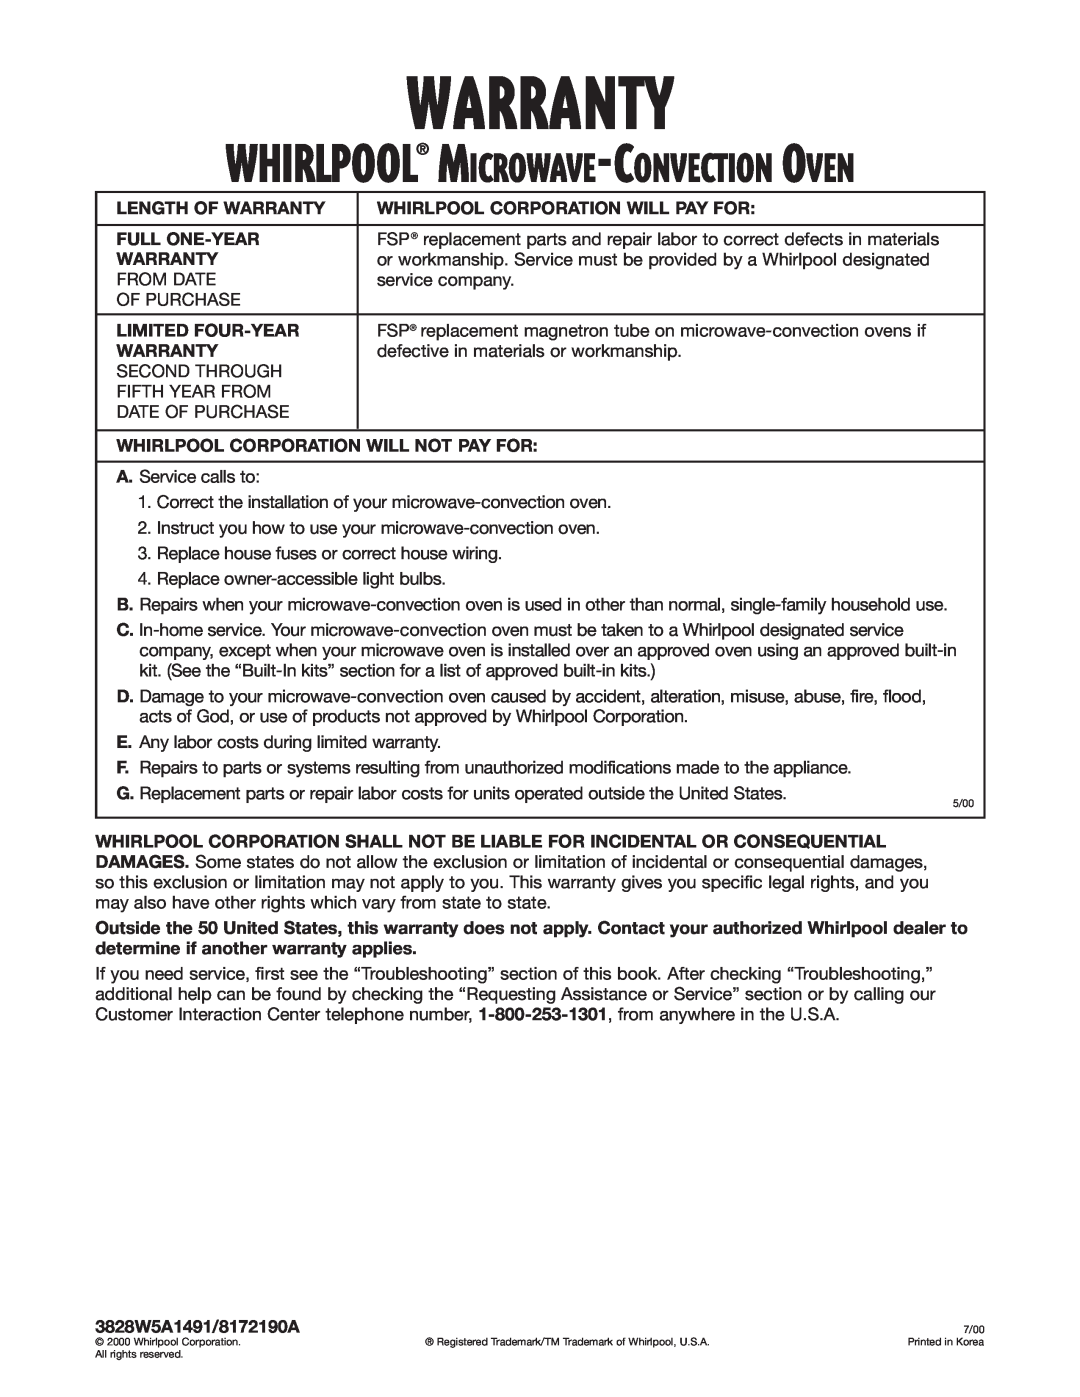 Whirlpool GM8155XJ installation instructions Warranty, Whirlpool Microwave-Convection Oven 